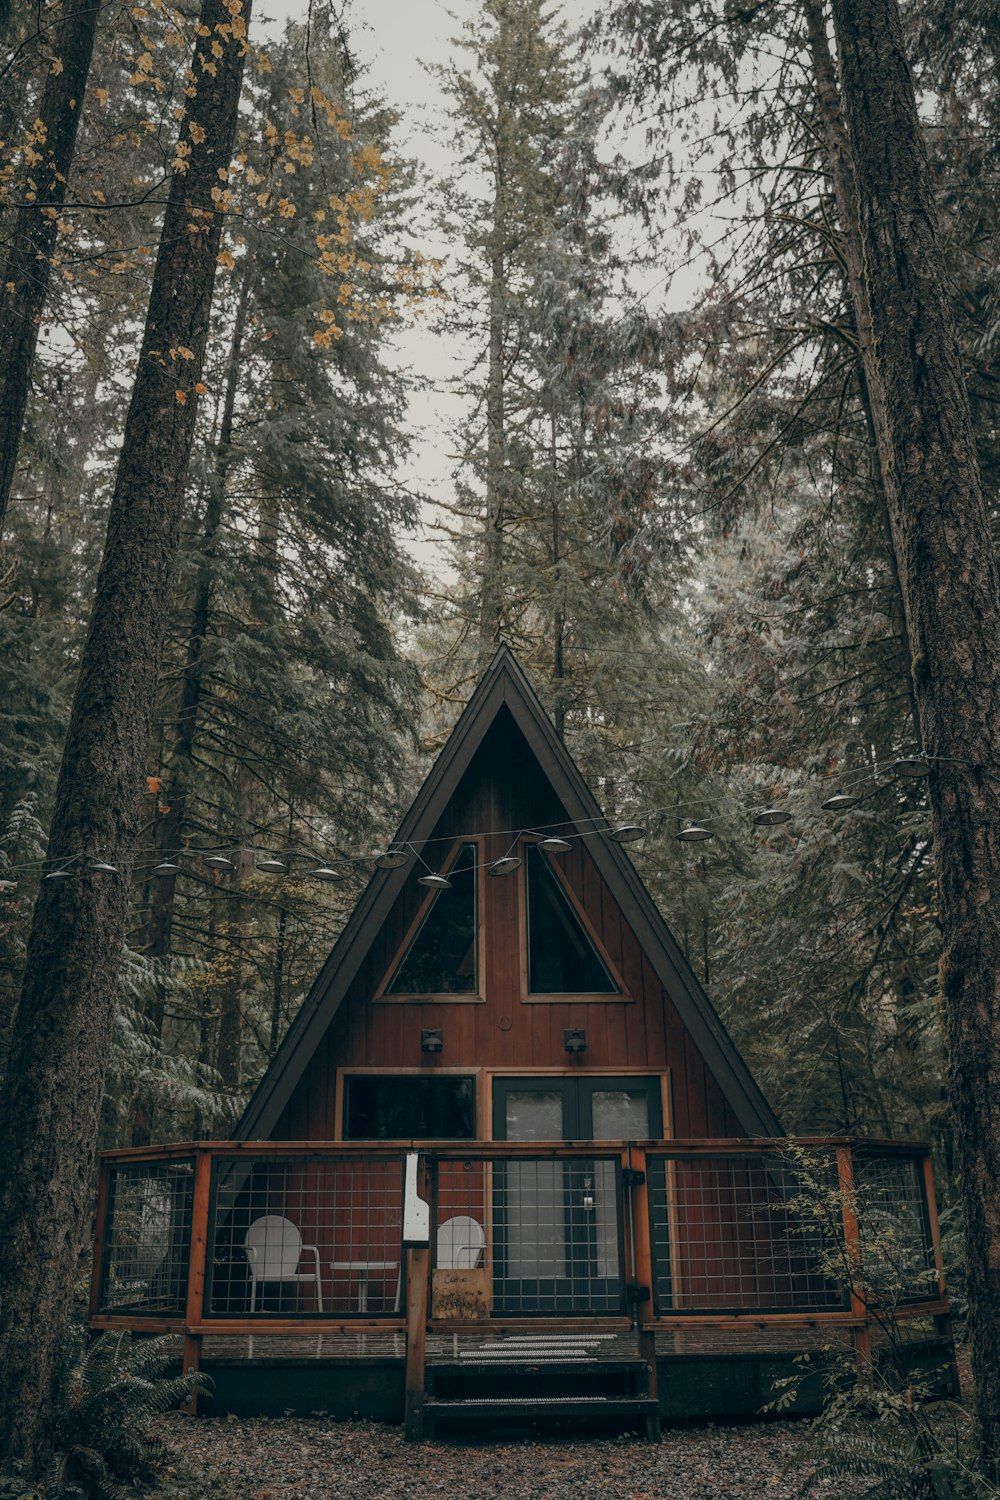 brown wooden cabin surrounded by trees